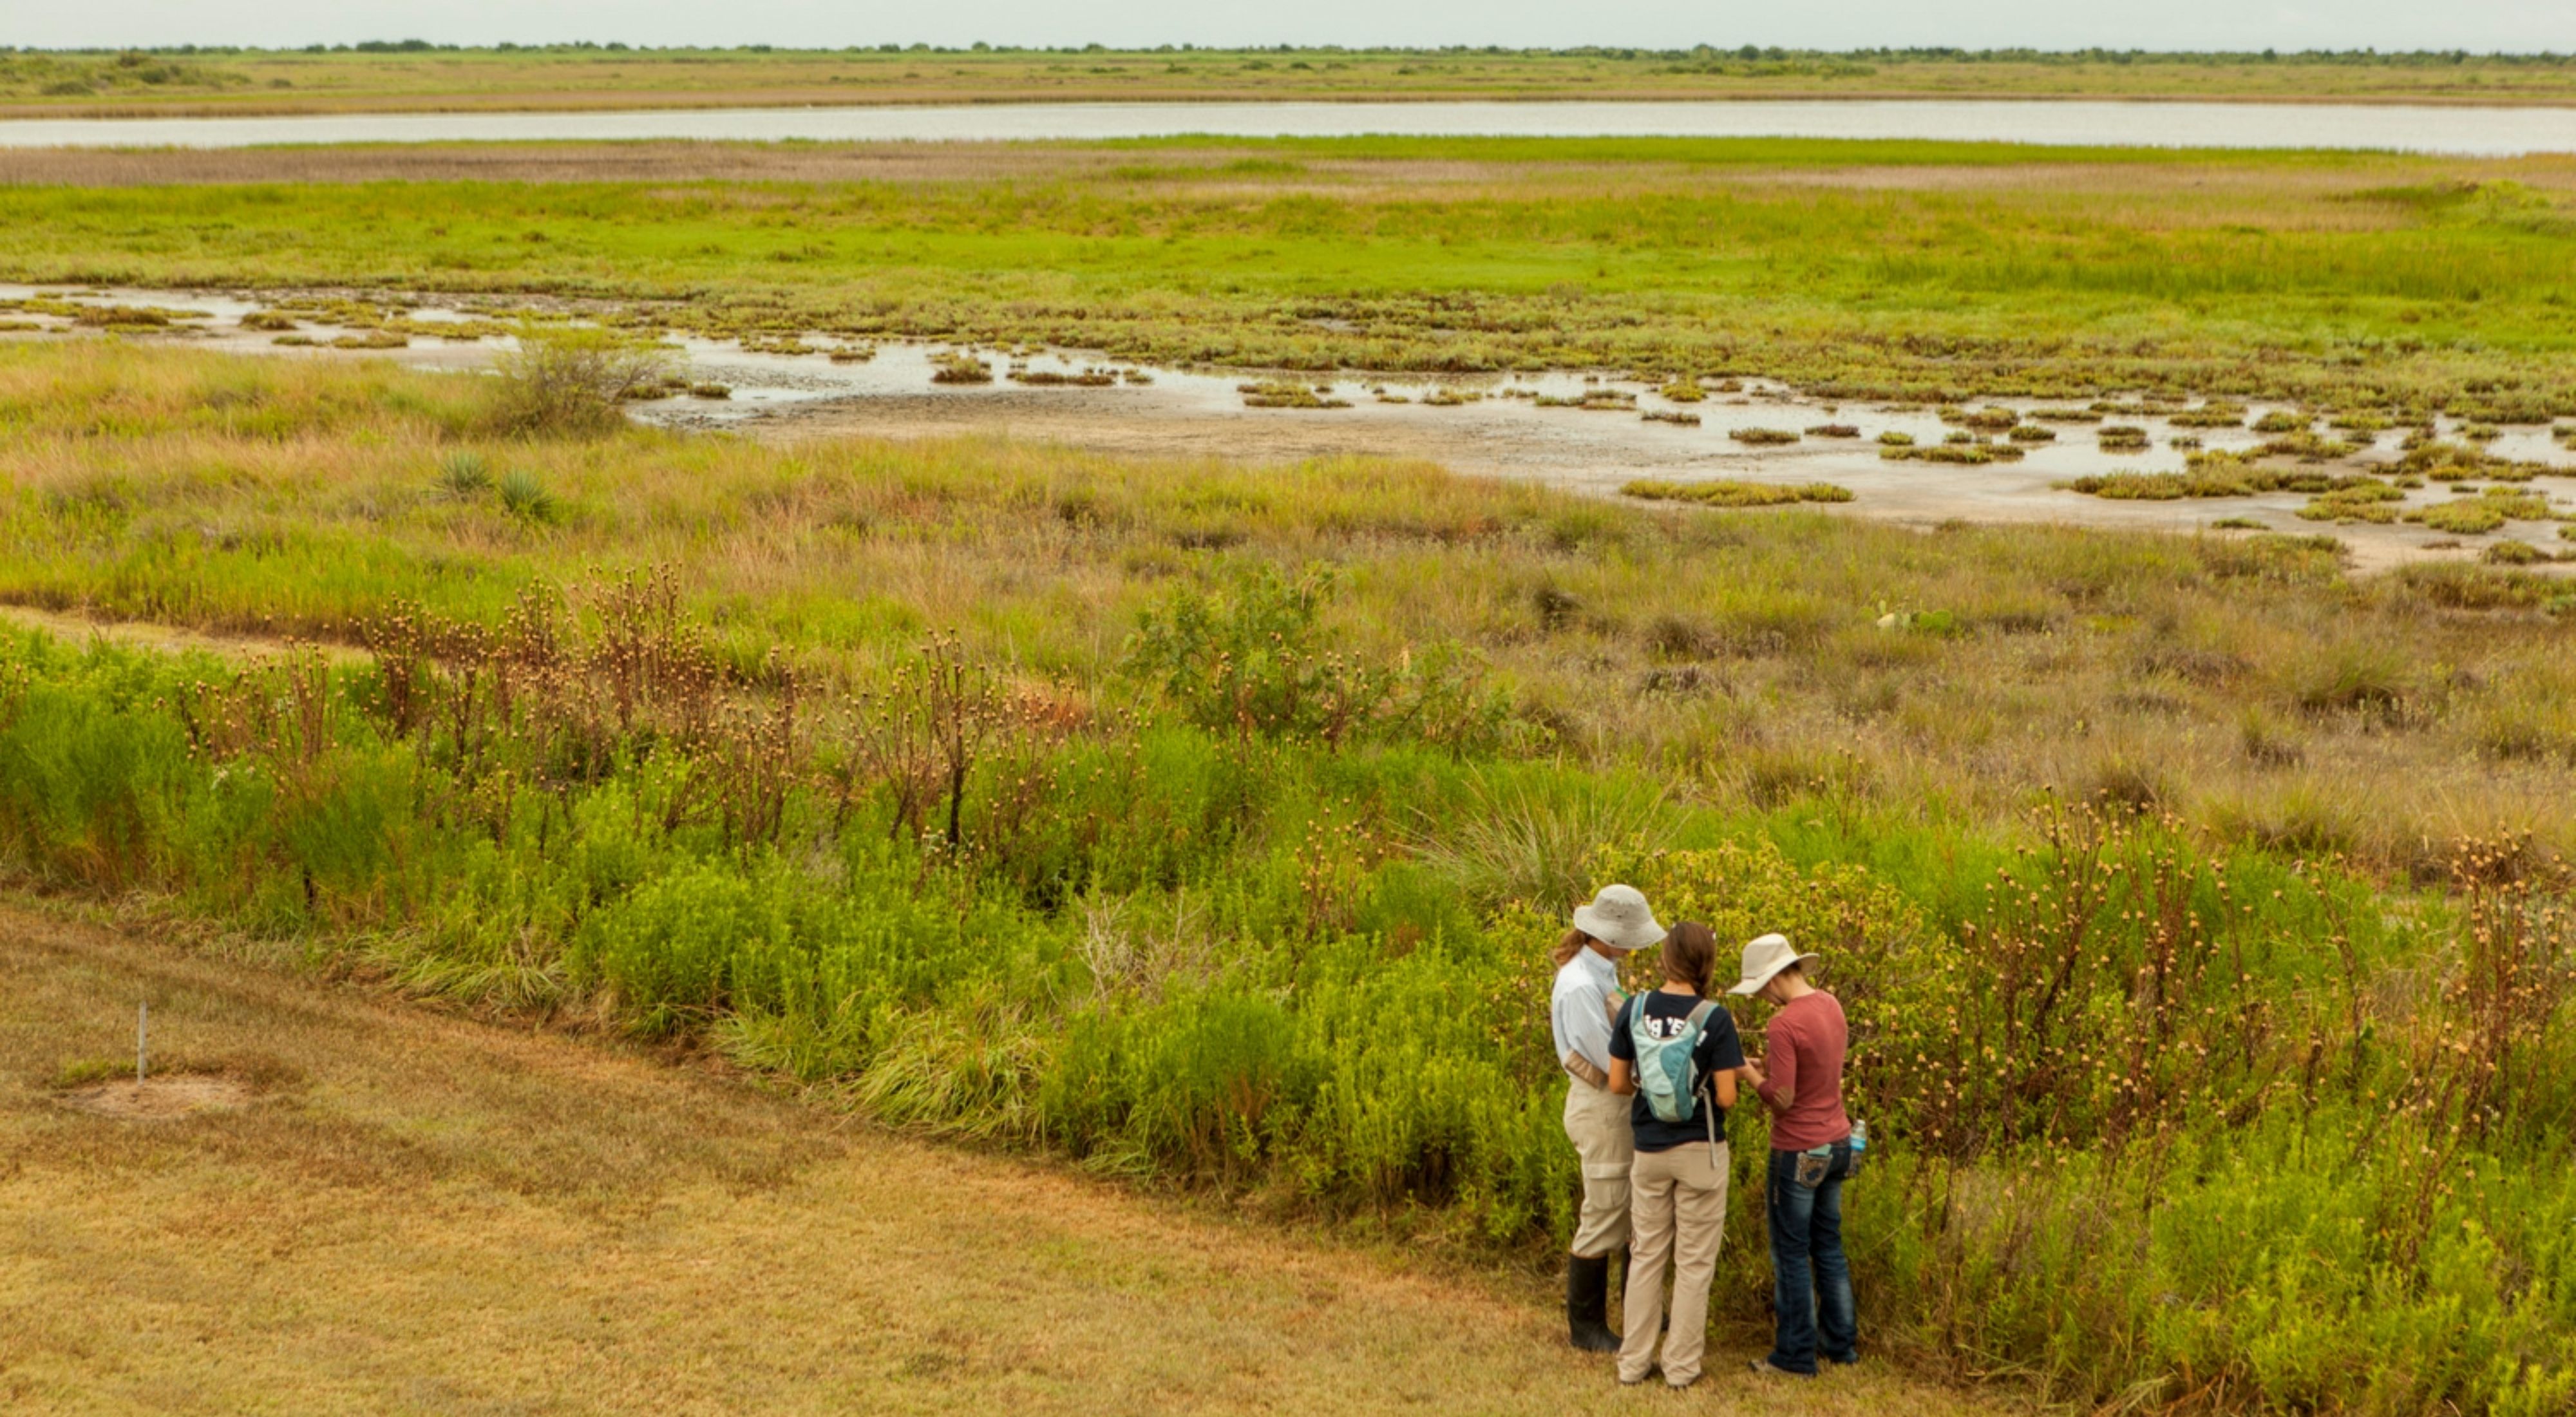 Three women stand together near an expanse of wetlands and water.